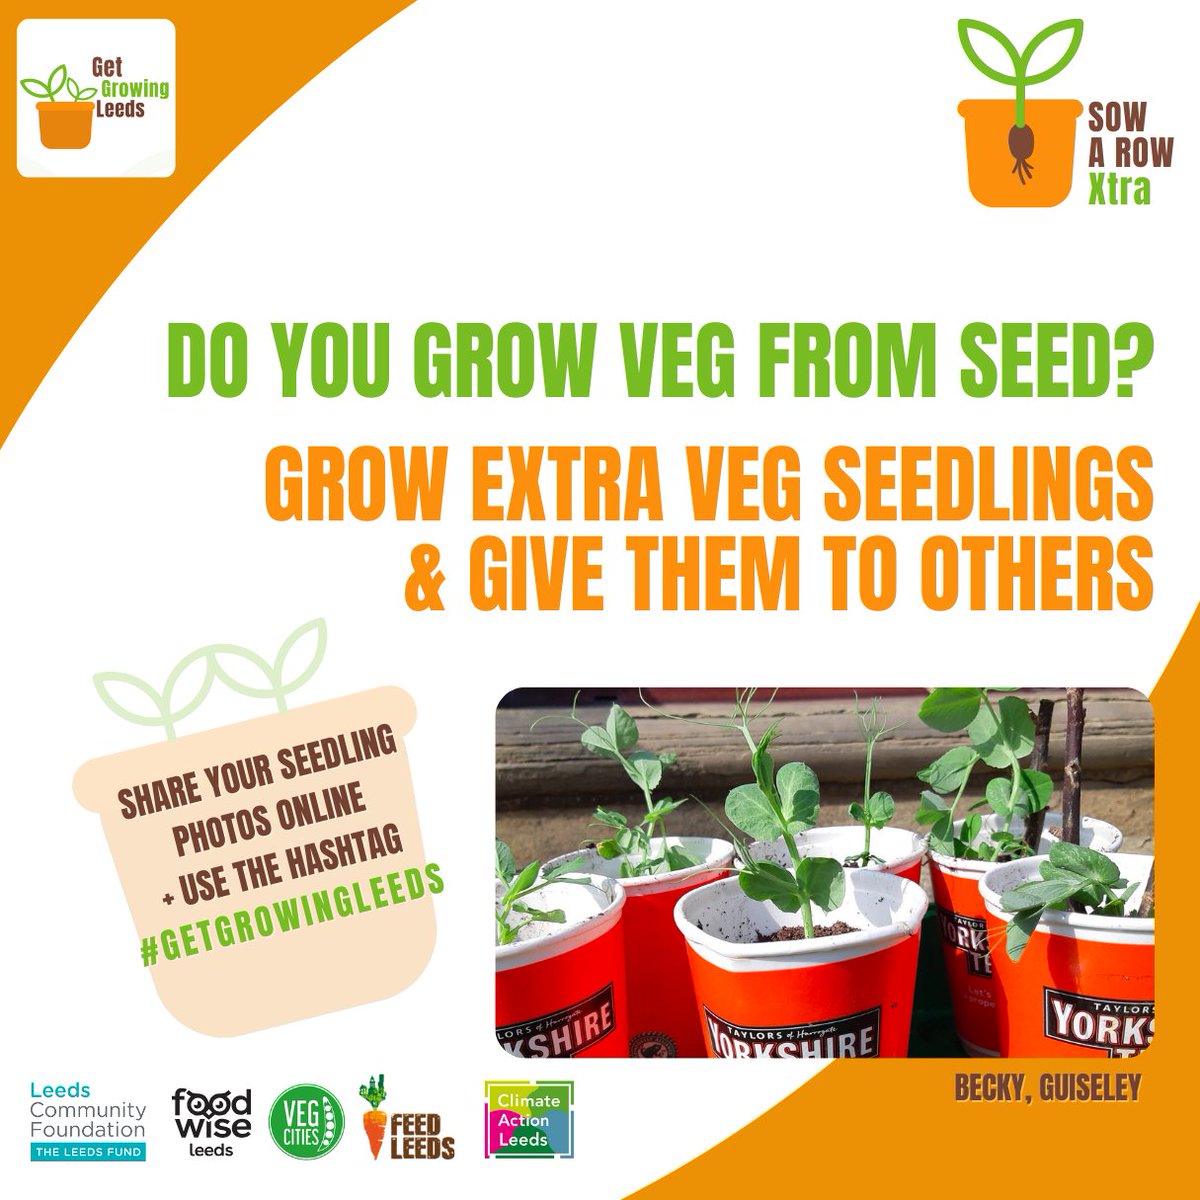 Share your seedling photos with the #hashtag #GetGrowingLeeds Do you grow veg from seed? Useful Links: linktr.ee/FeedLeeds Drop off at @MeanwoodFarm or #OakwoodMarketGarden Or take to a Little Veg Library ( LVL)